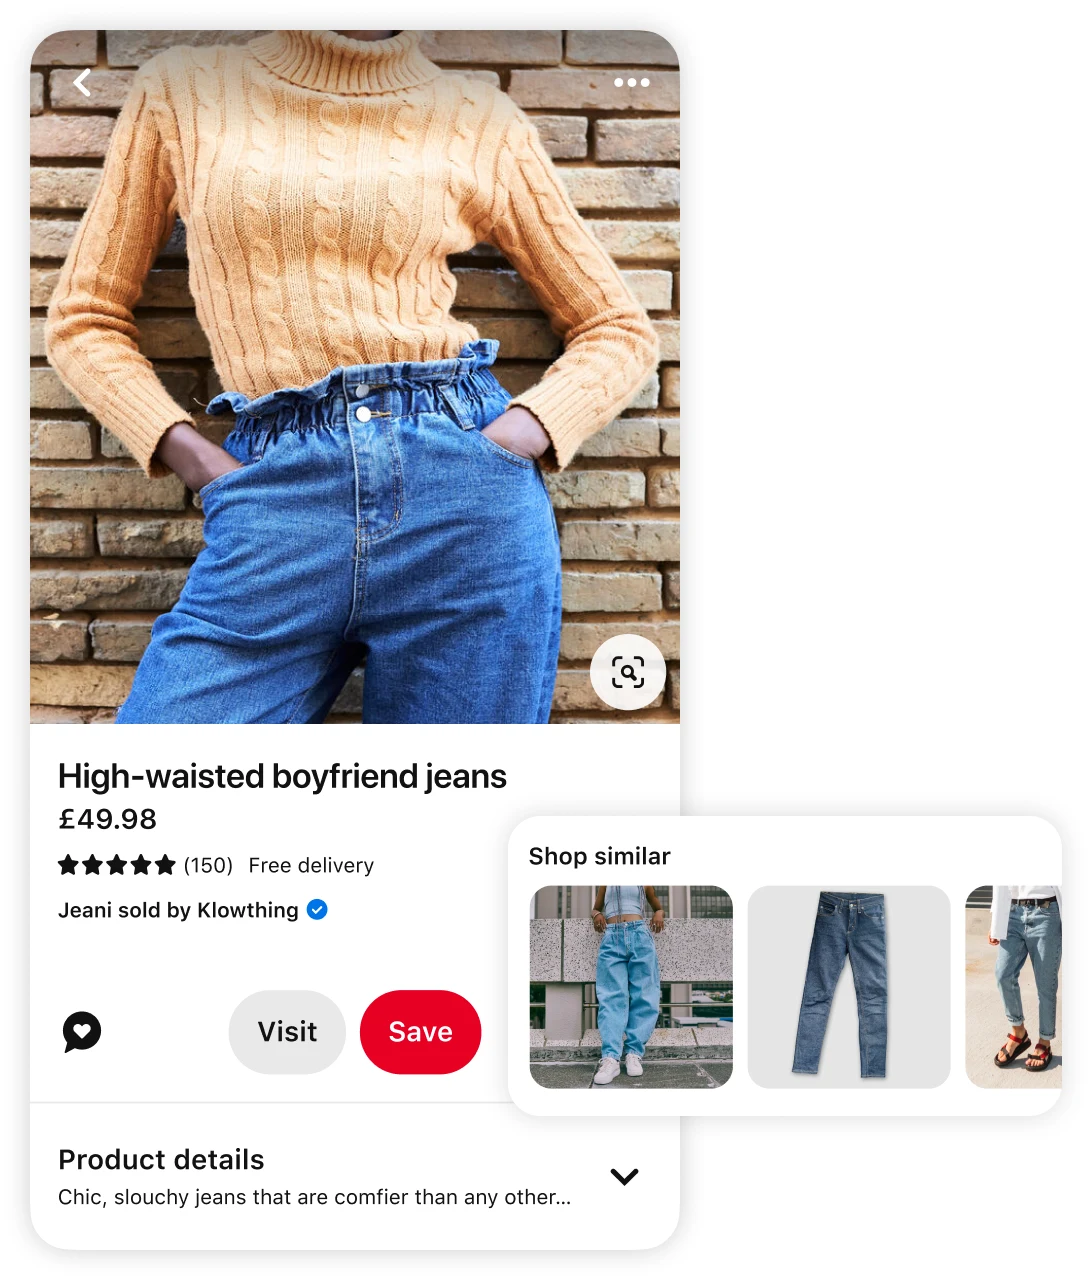 Pin of a woman wearing a pale orange cable-knit jumper and high-waisted boyfriend jeans with suggested similar products and a prompt to ‘shop similar’